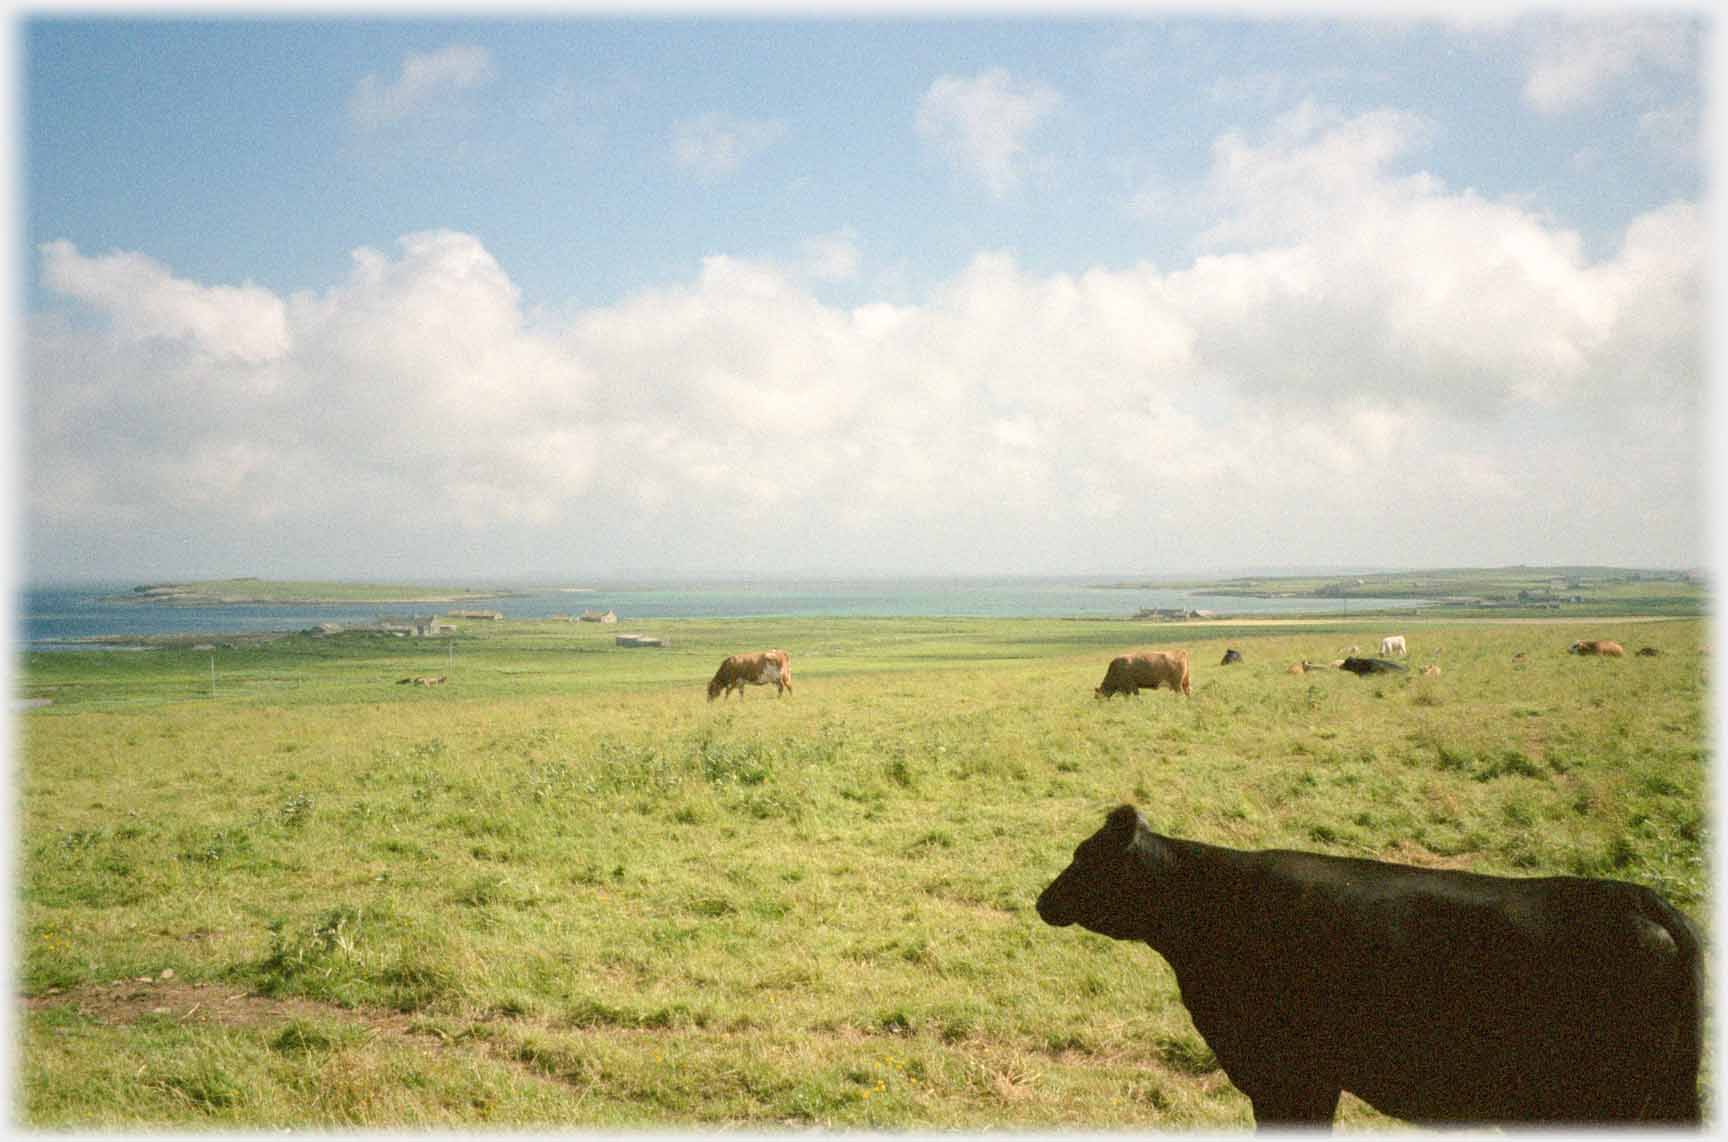 Cow contemplating grass and sea beyond.